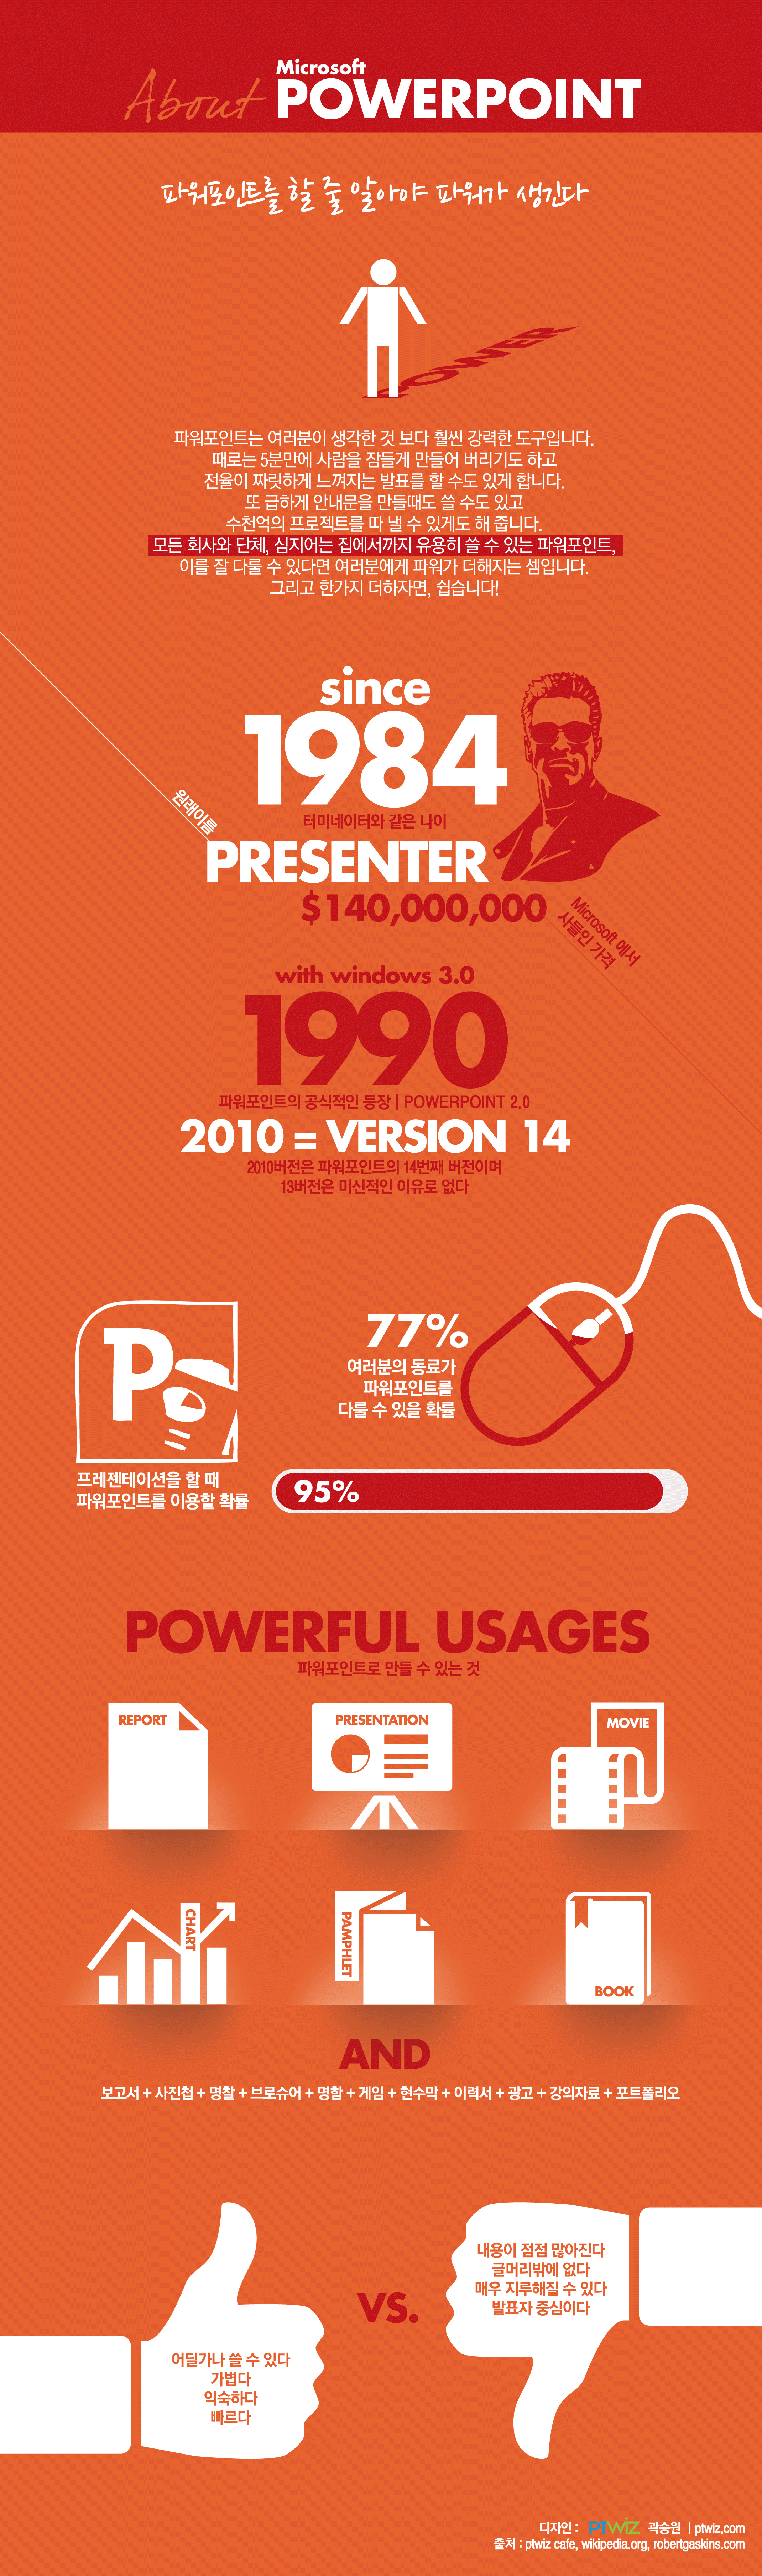 About MS powerpoint Infographic